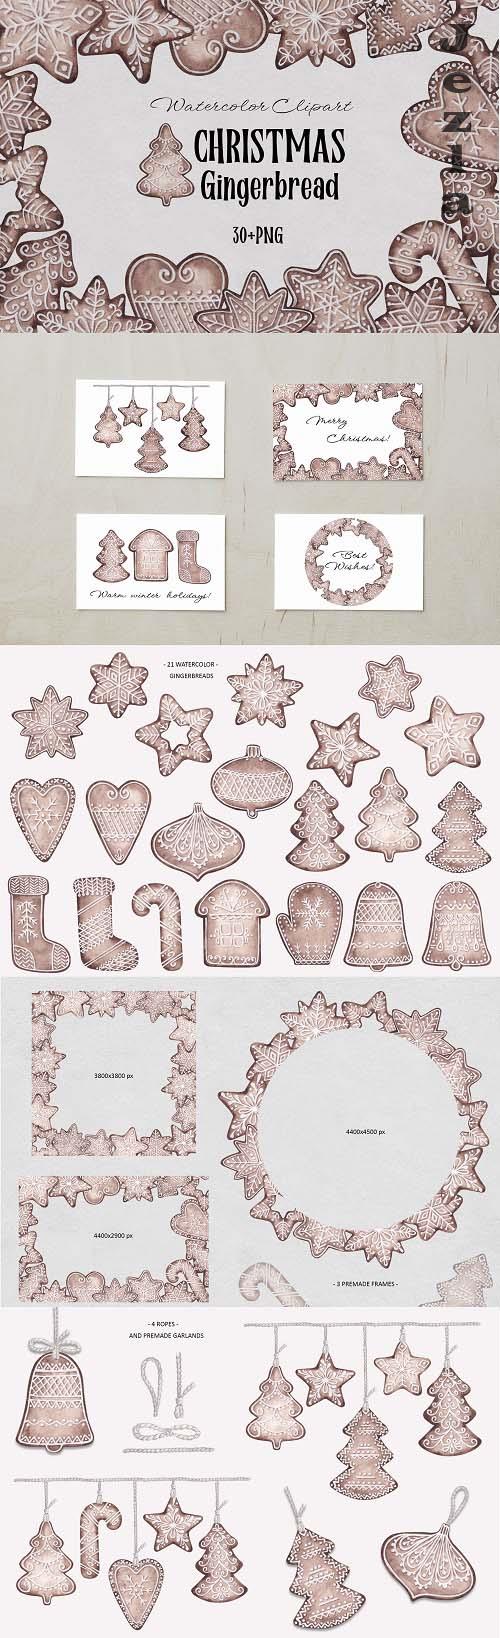 Watercolor Clipart Christmas Gingerbread - 1631337